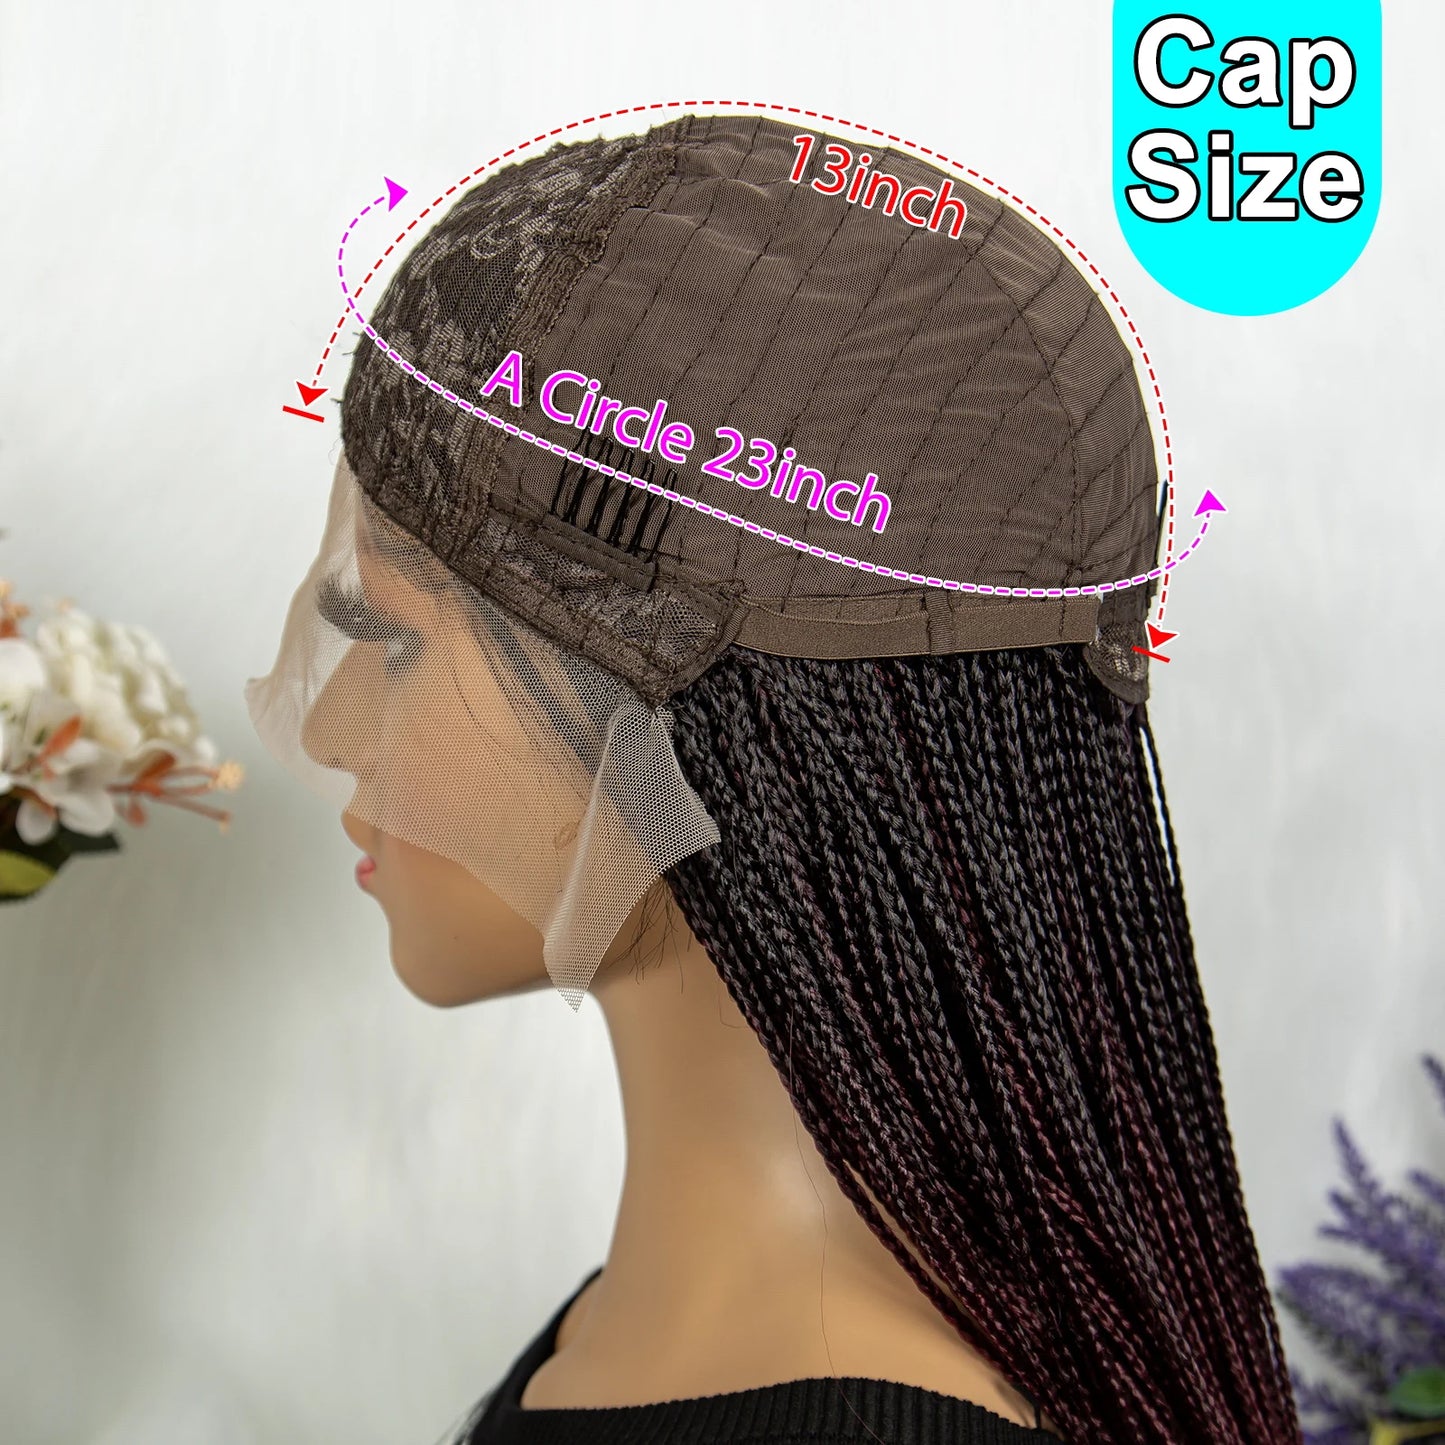 Synthetic Lace Wigs, Cornrow Braids Wig 13x4x1 T Part Lace Braided Wig